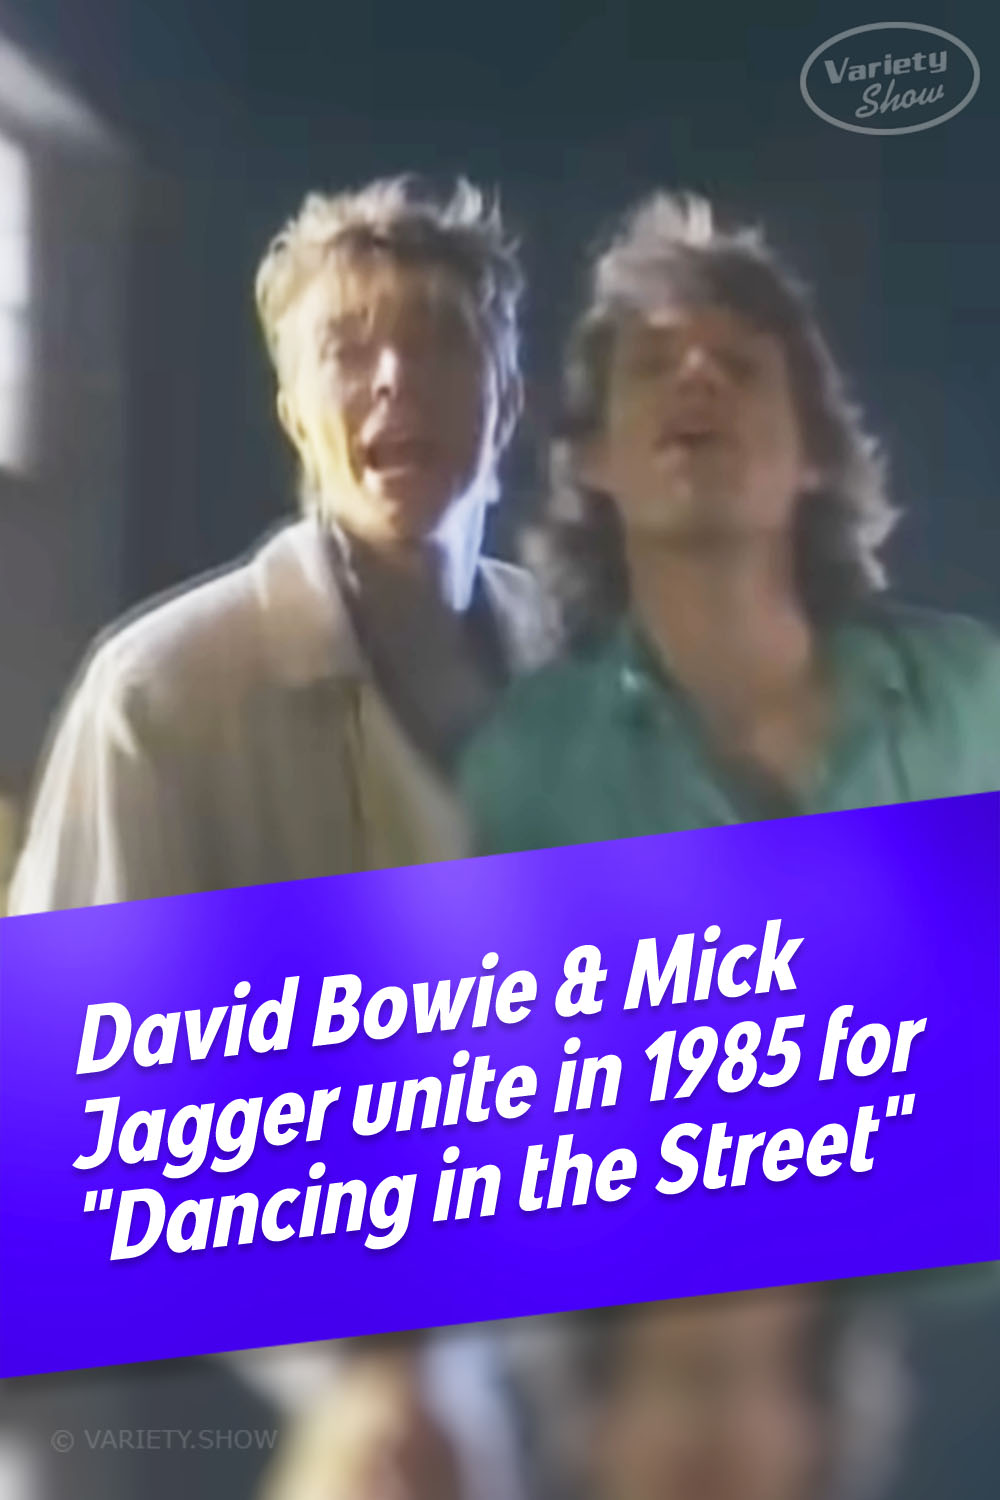 David Bowie & Mick Jagger unite in 1985 for \